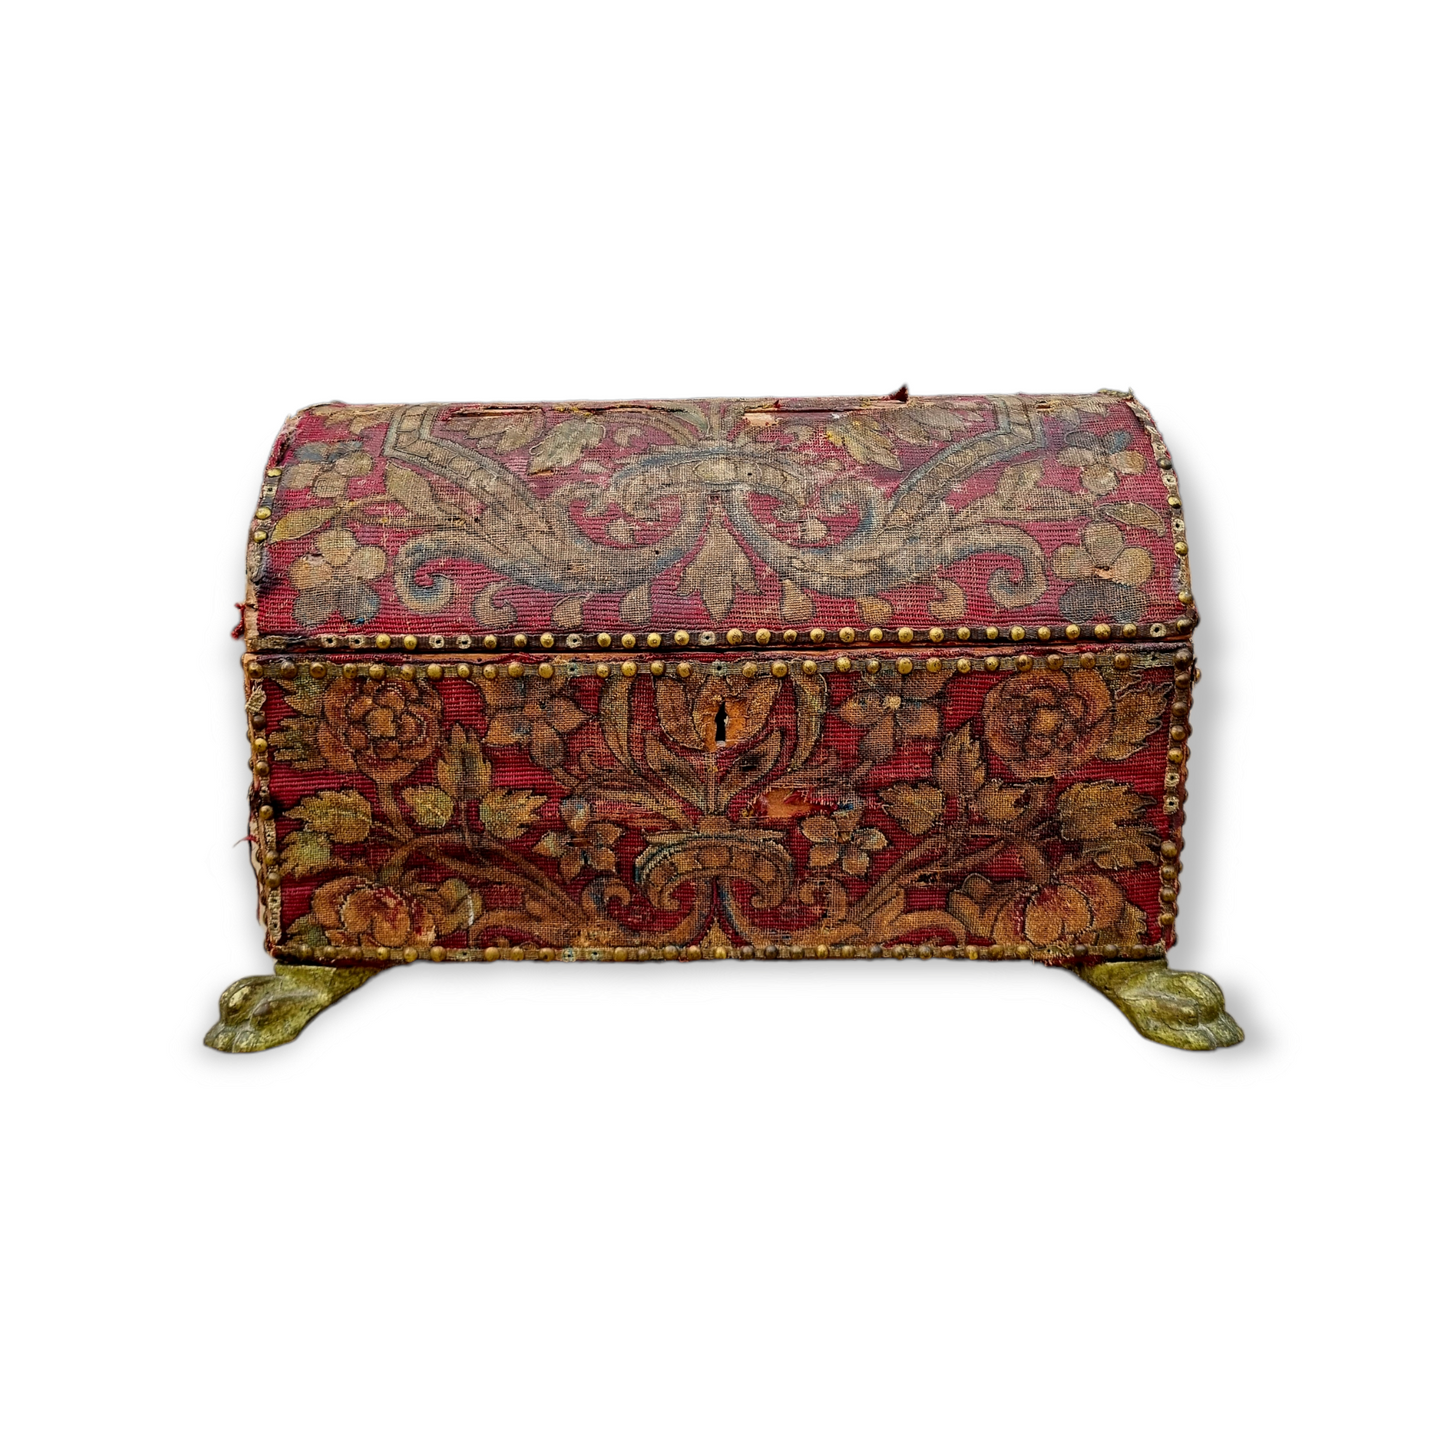 Early 17th Century Italian Antique Domed Top Table Box / Casket